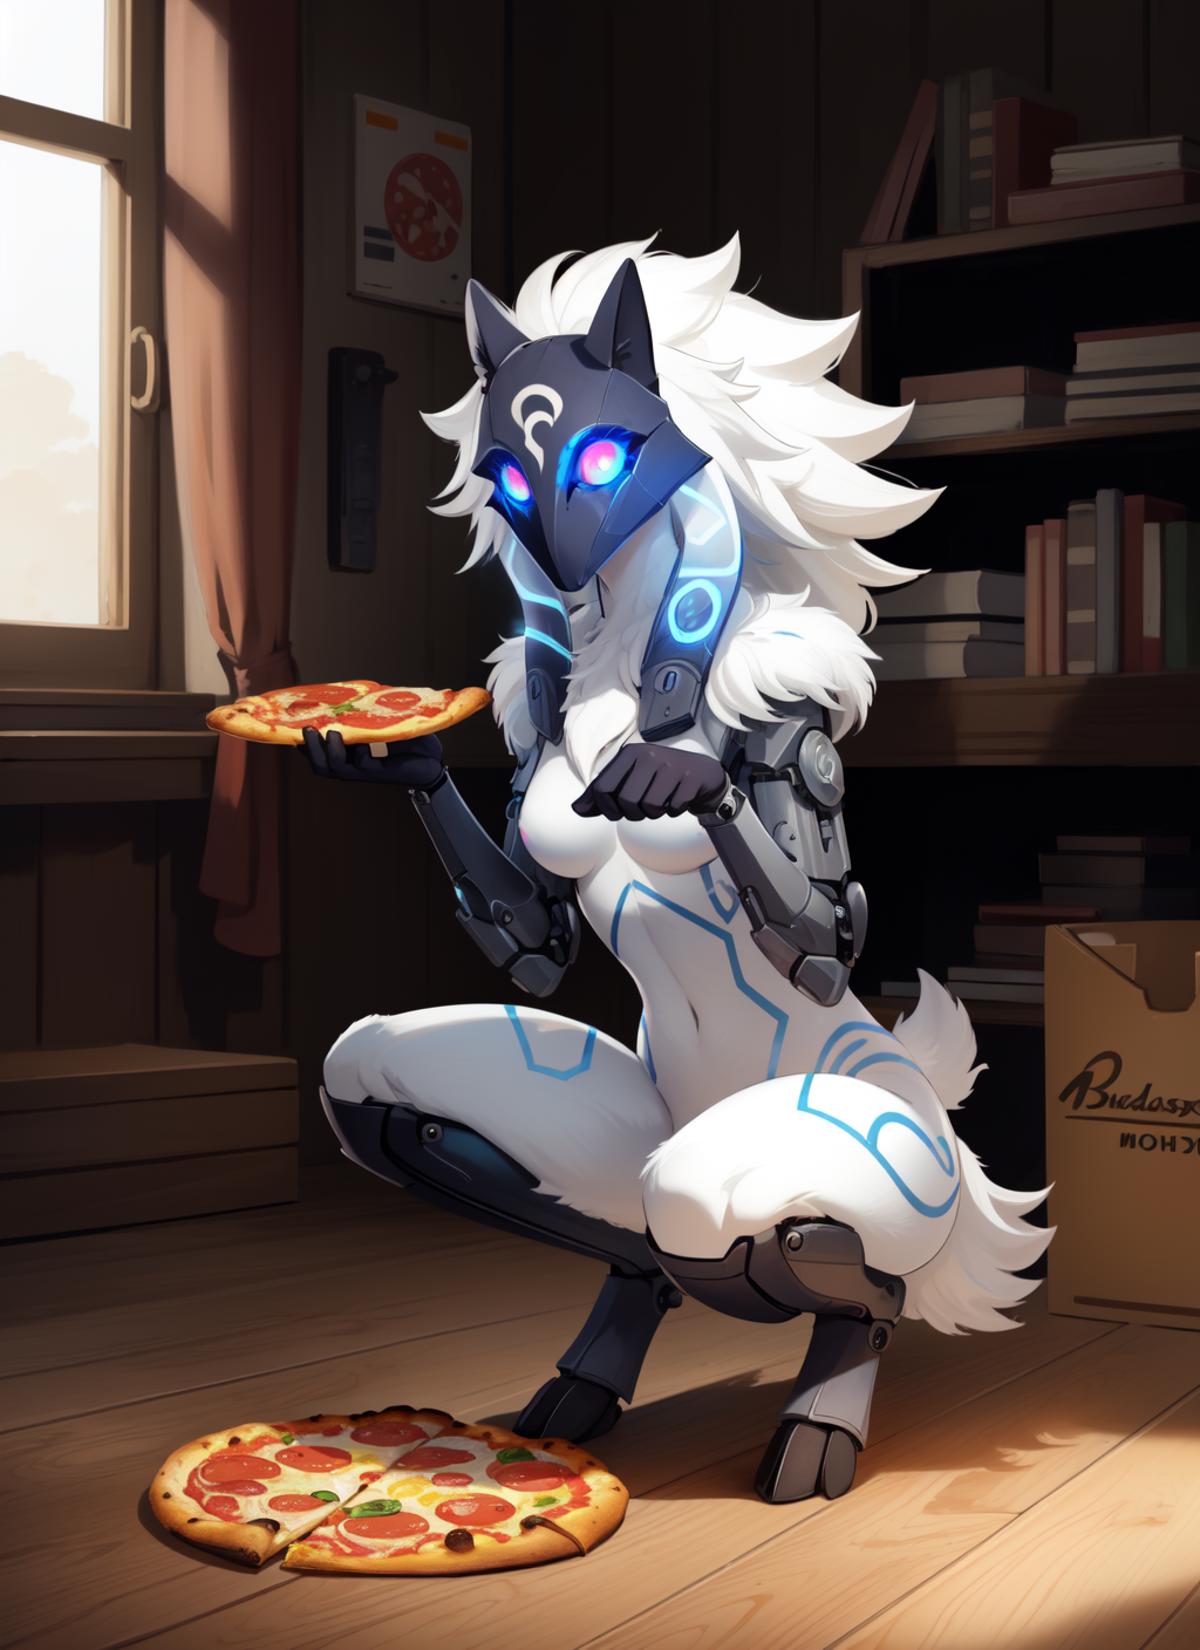 A character with blue eyes and a white body, holding a slice of pizza.